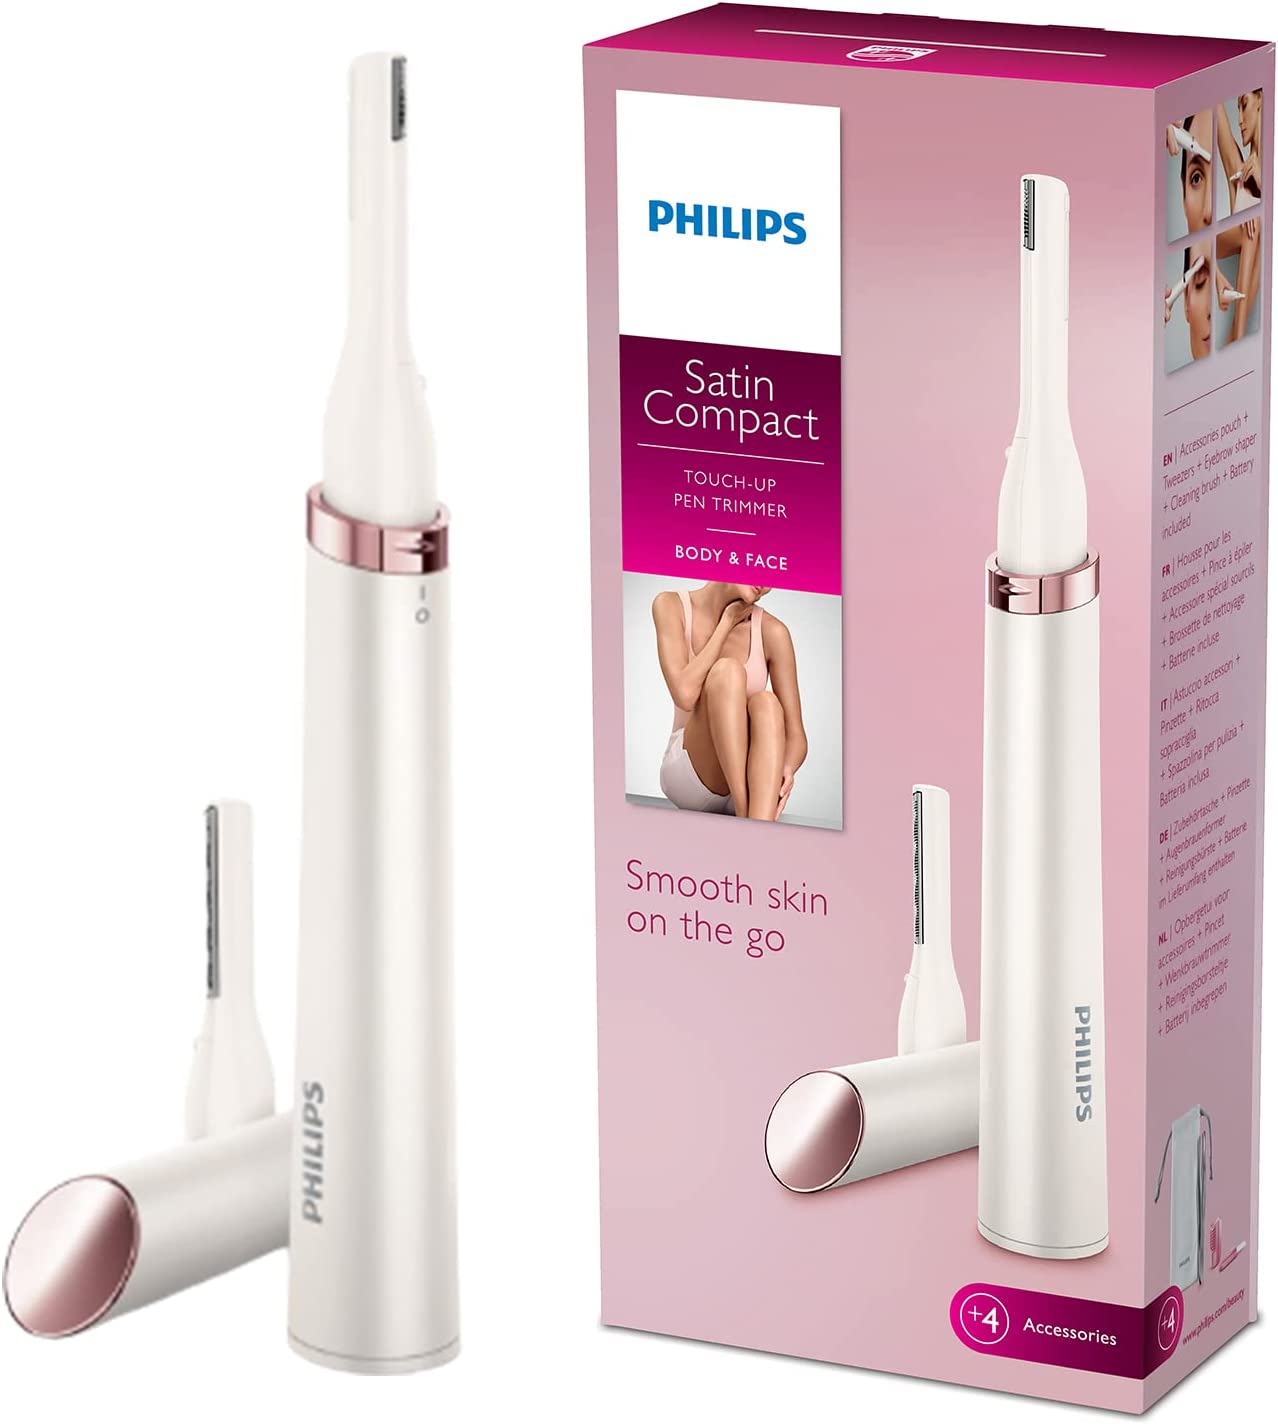 PHILIPS HP 6393/00 - Satin Compact Body & Face Trimmer